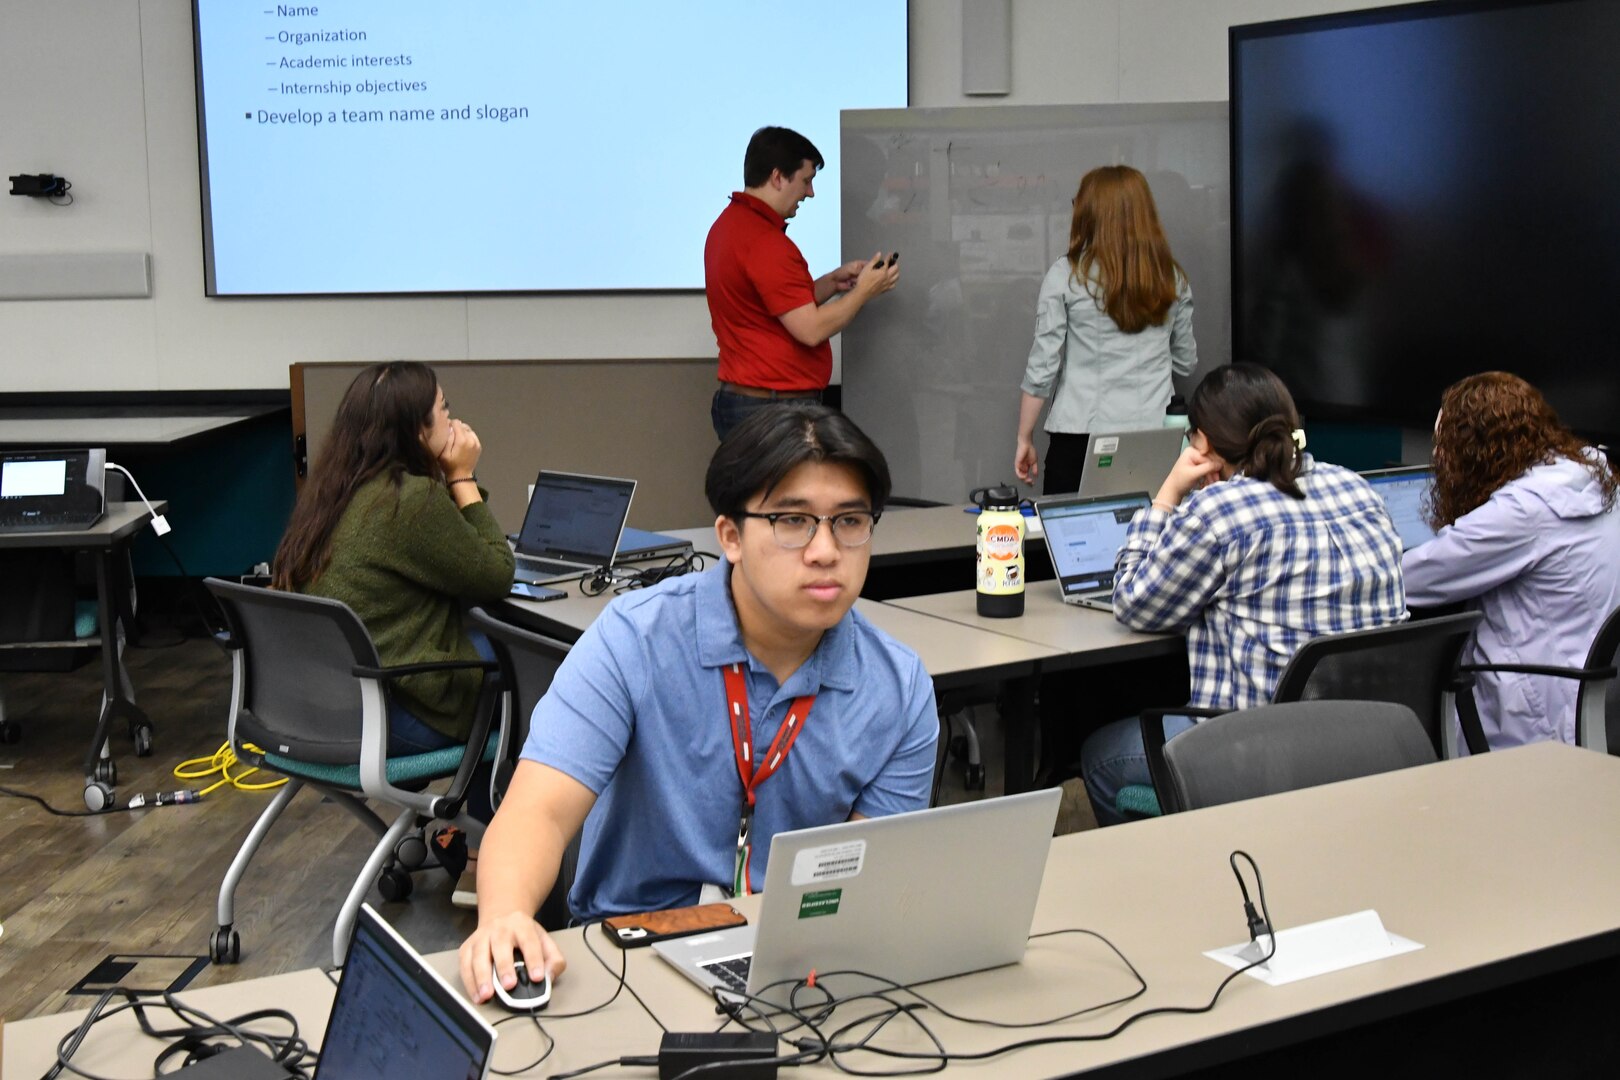 IMAGE: Ethan Thai-Nguyen, an intern in the Electromagnetic and Sensor Systems Department at Naval Surface Warfare Center Dahlgren Division (NSWCDD), was a member of Team HEDGE during the Modeling and Simulation Toolbox Summer Hackathon July 19 in NSWCDD’s Innovation Lab.